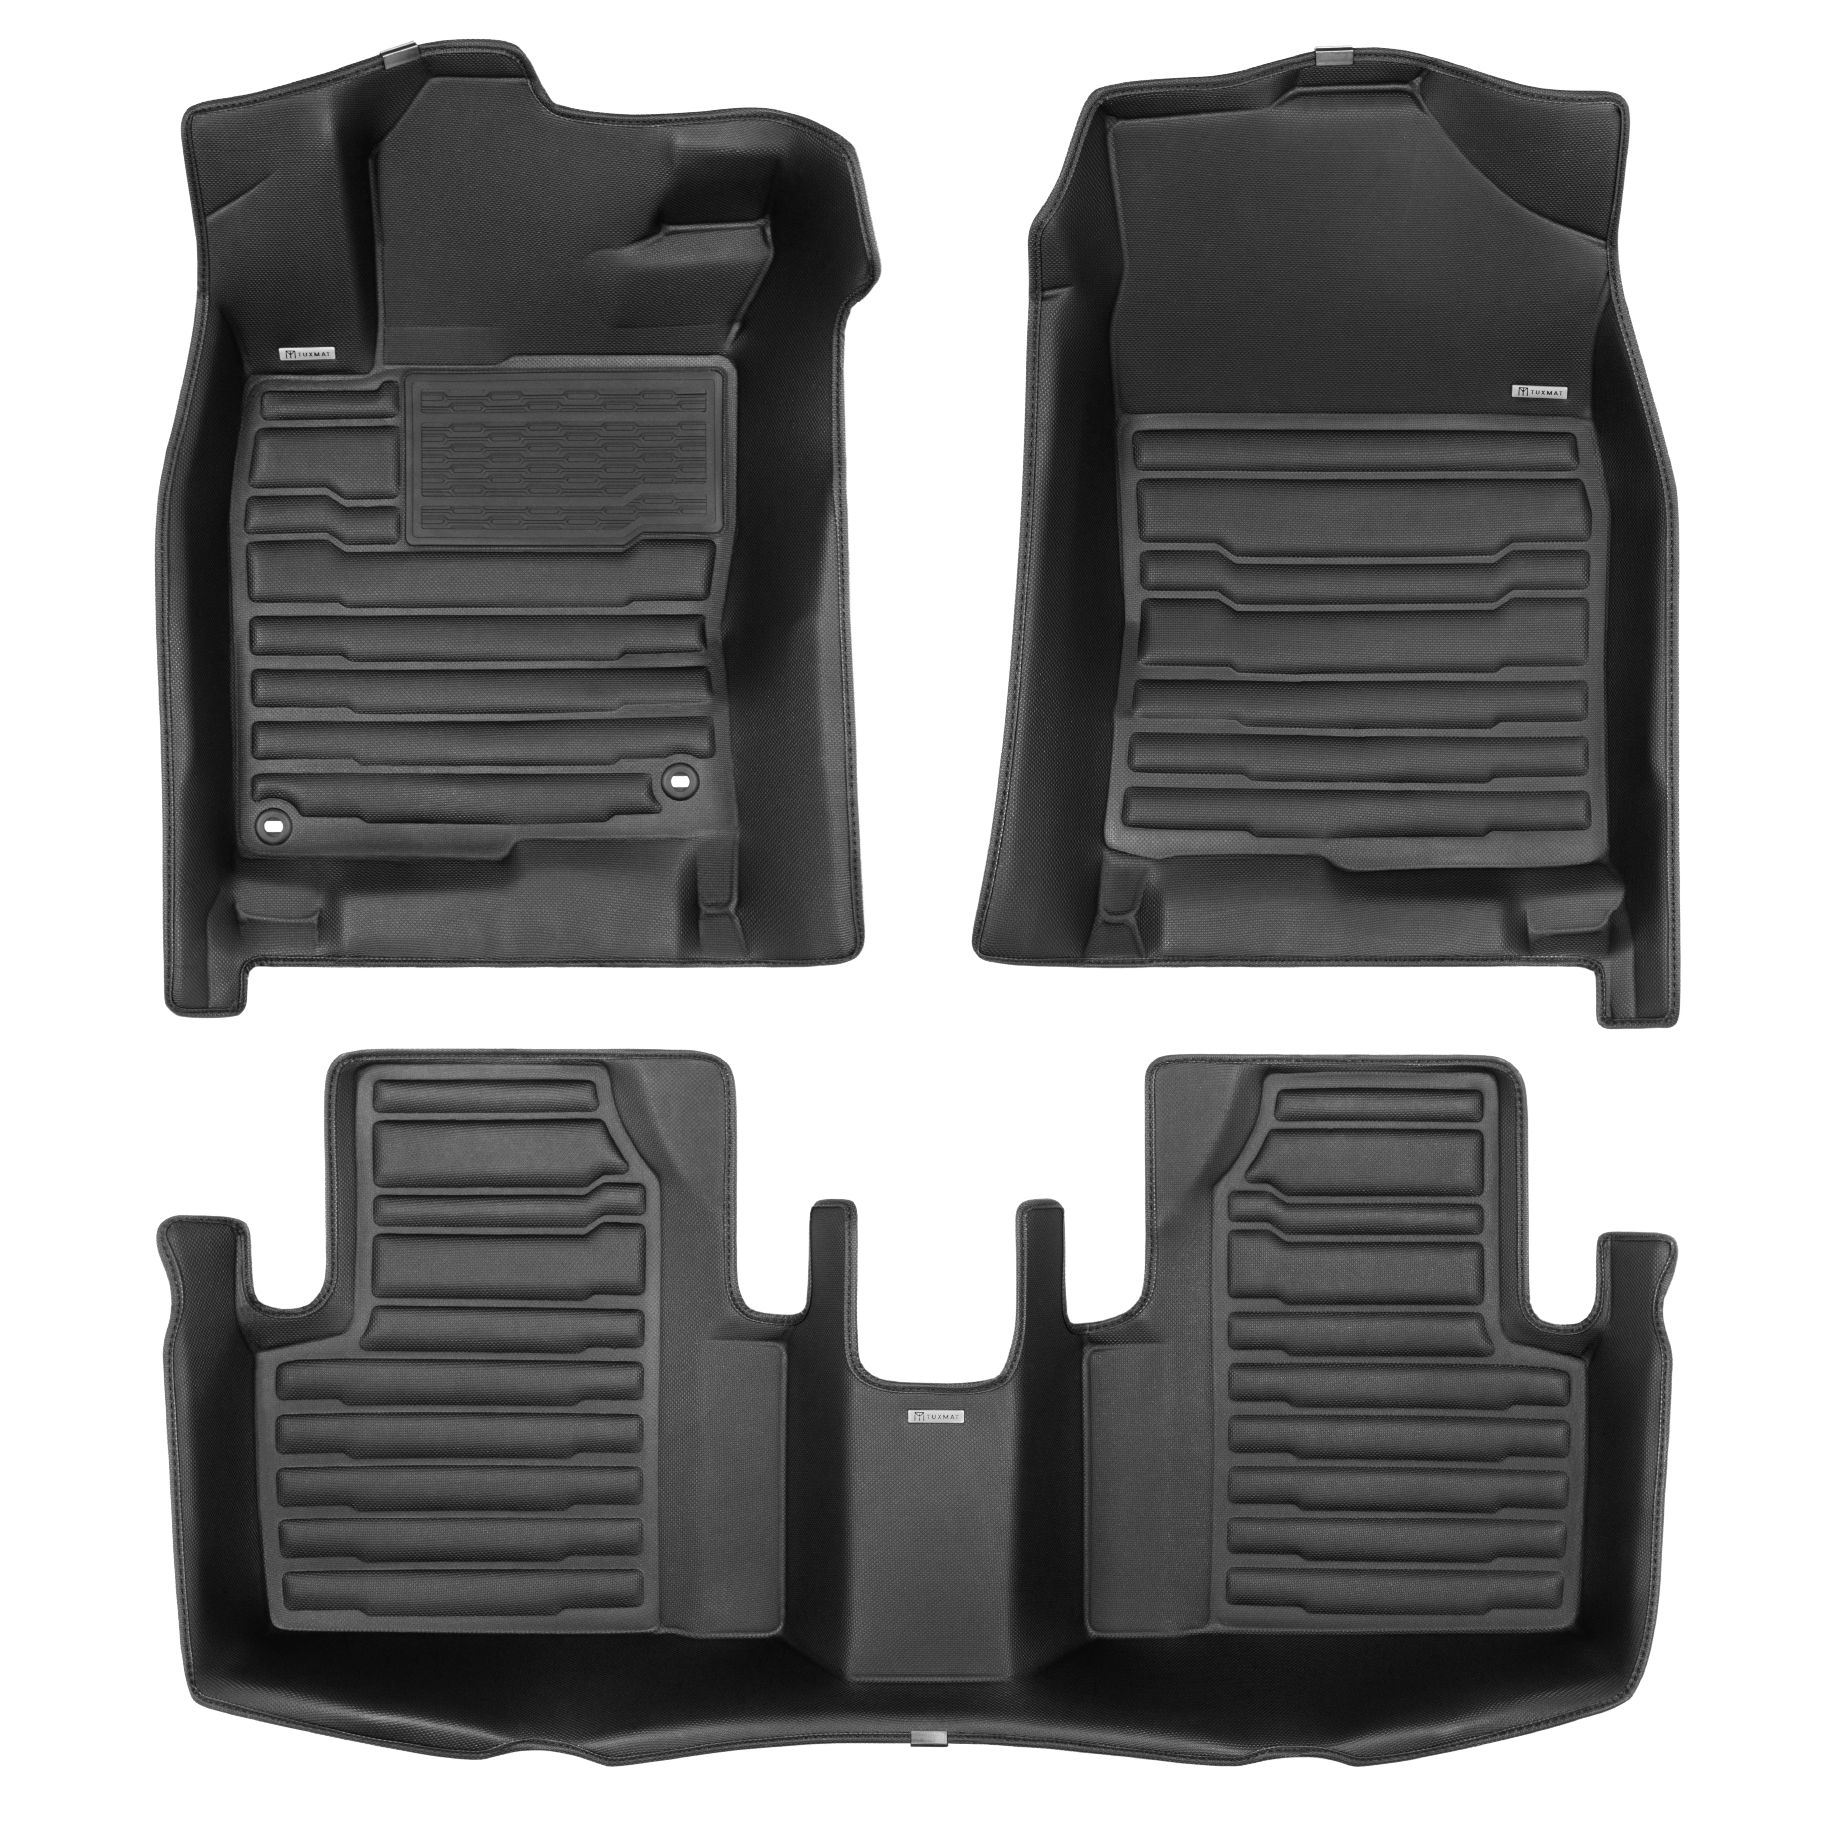 2011 Ford Fusion All-Weather Car Mats - Flexible Rubber Floor Mats